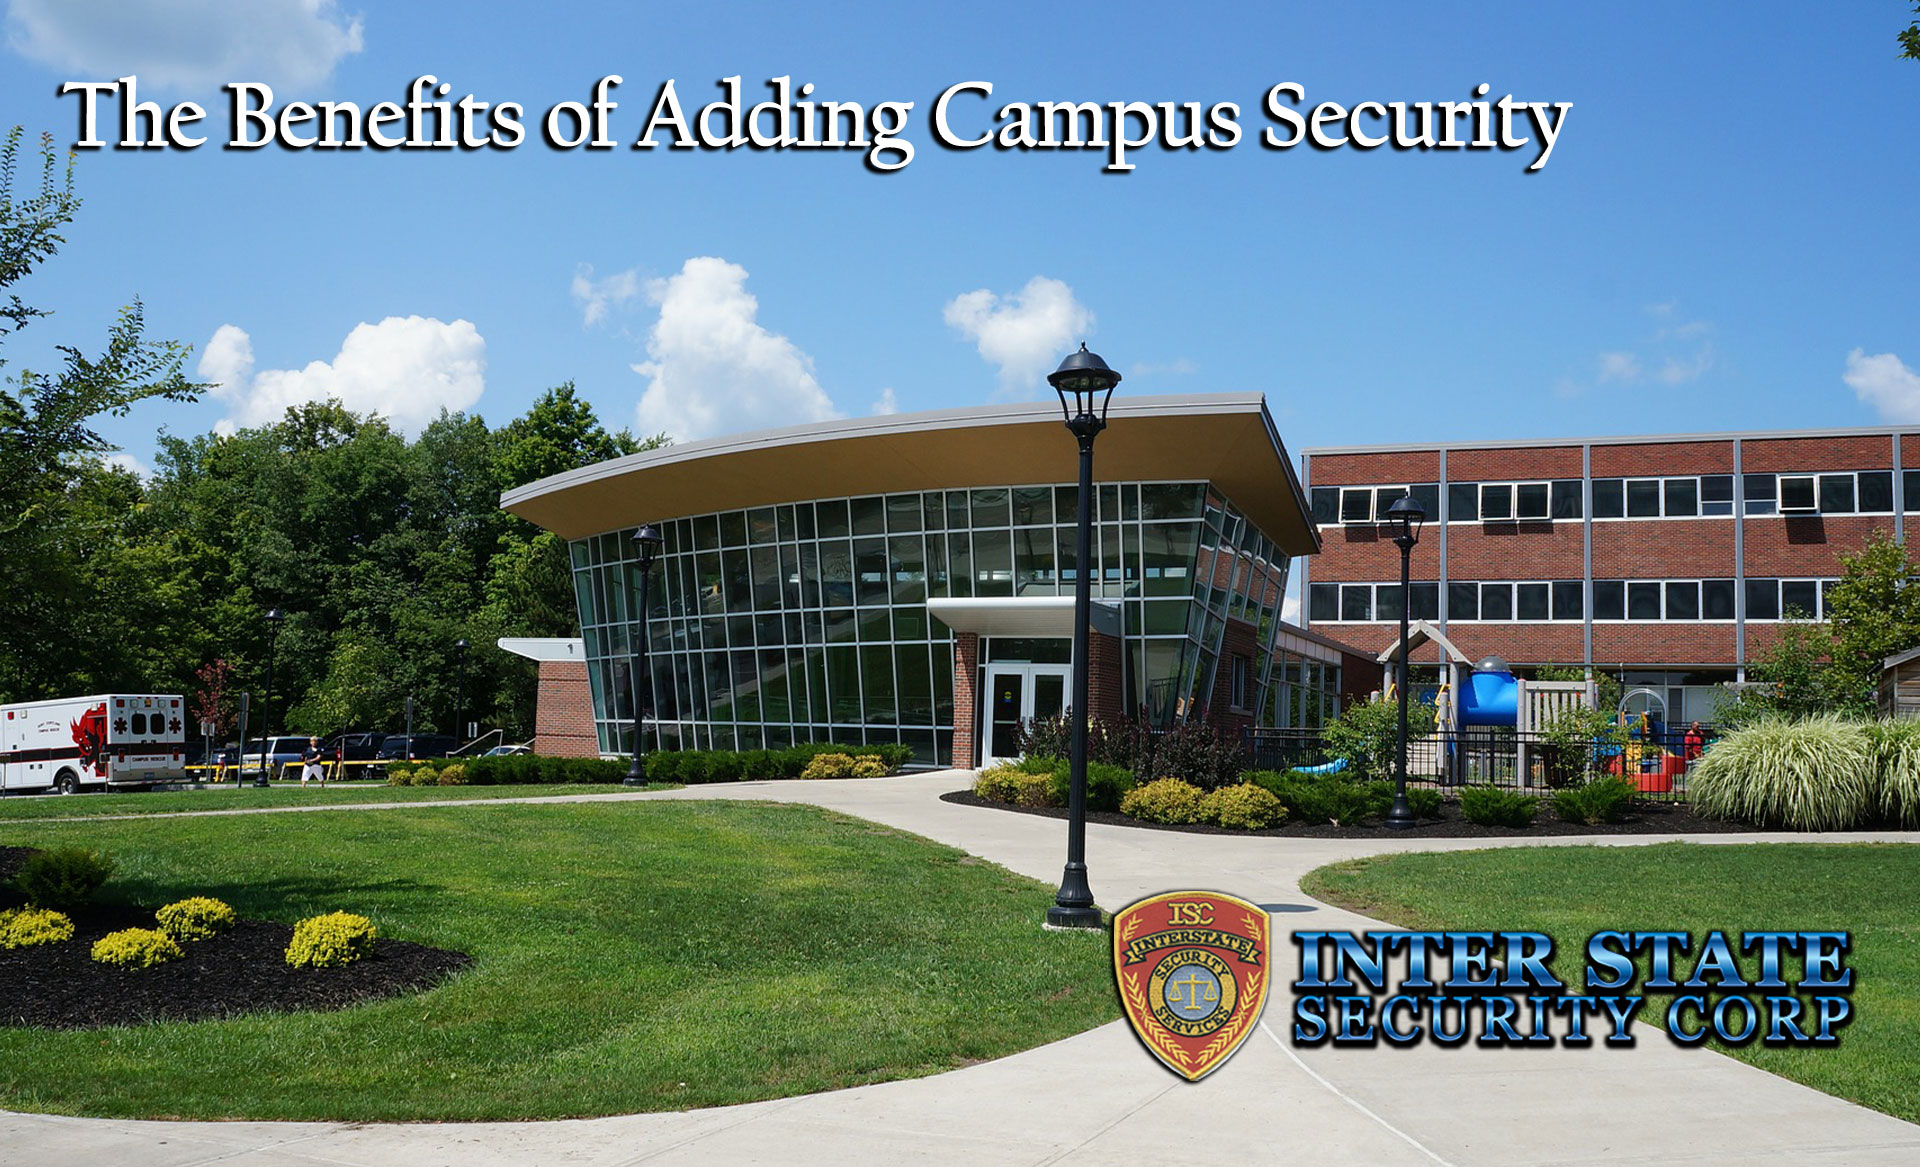 The Benefits of Adding Campus Security